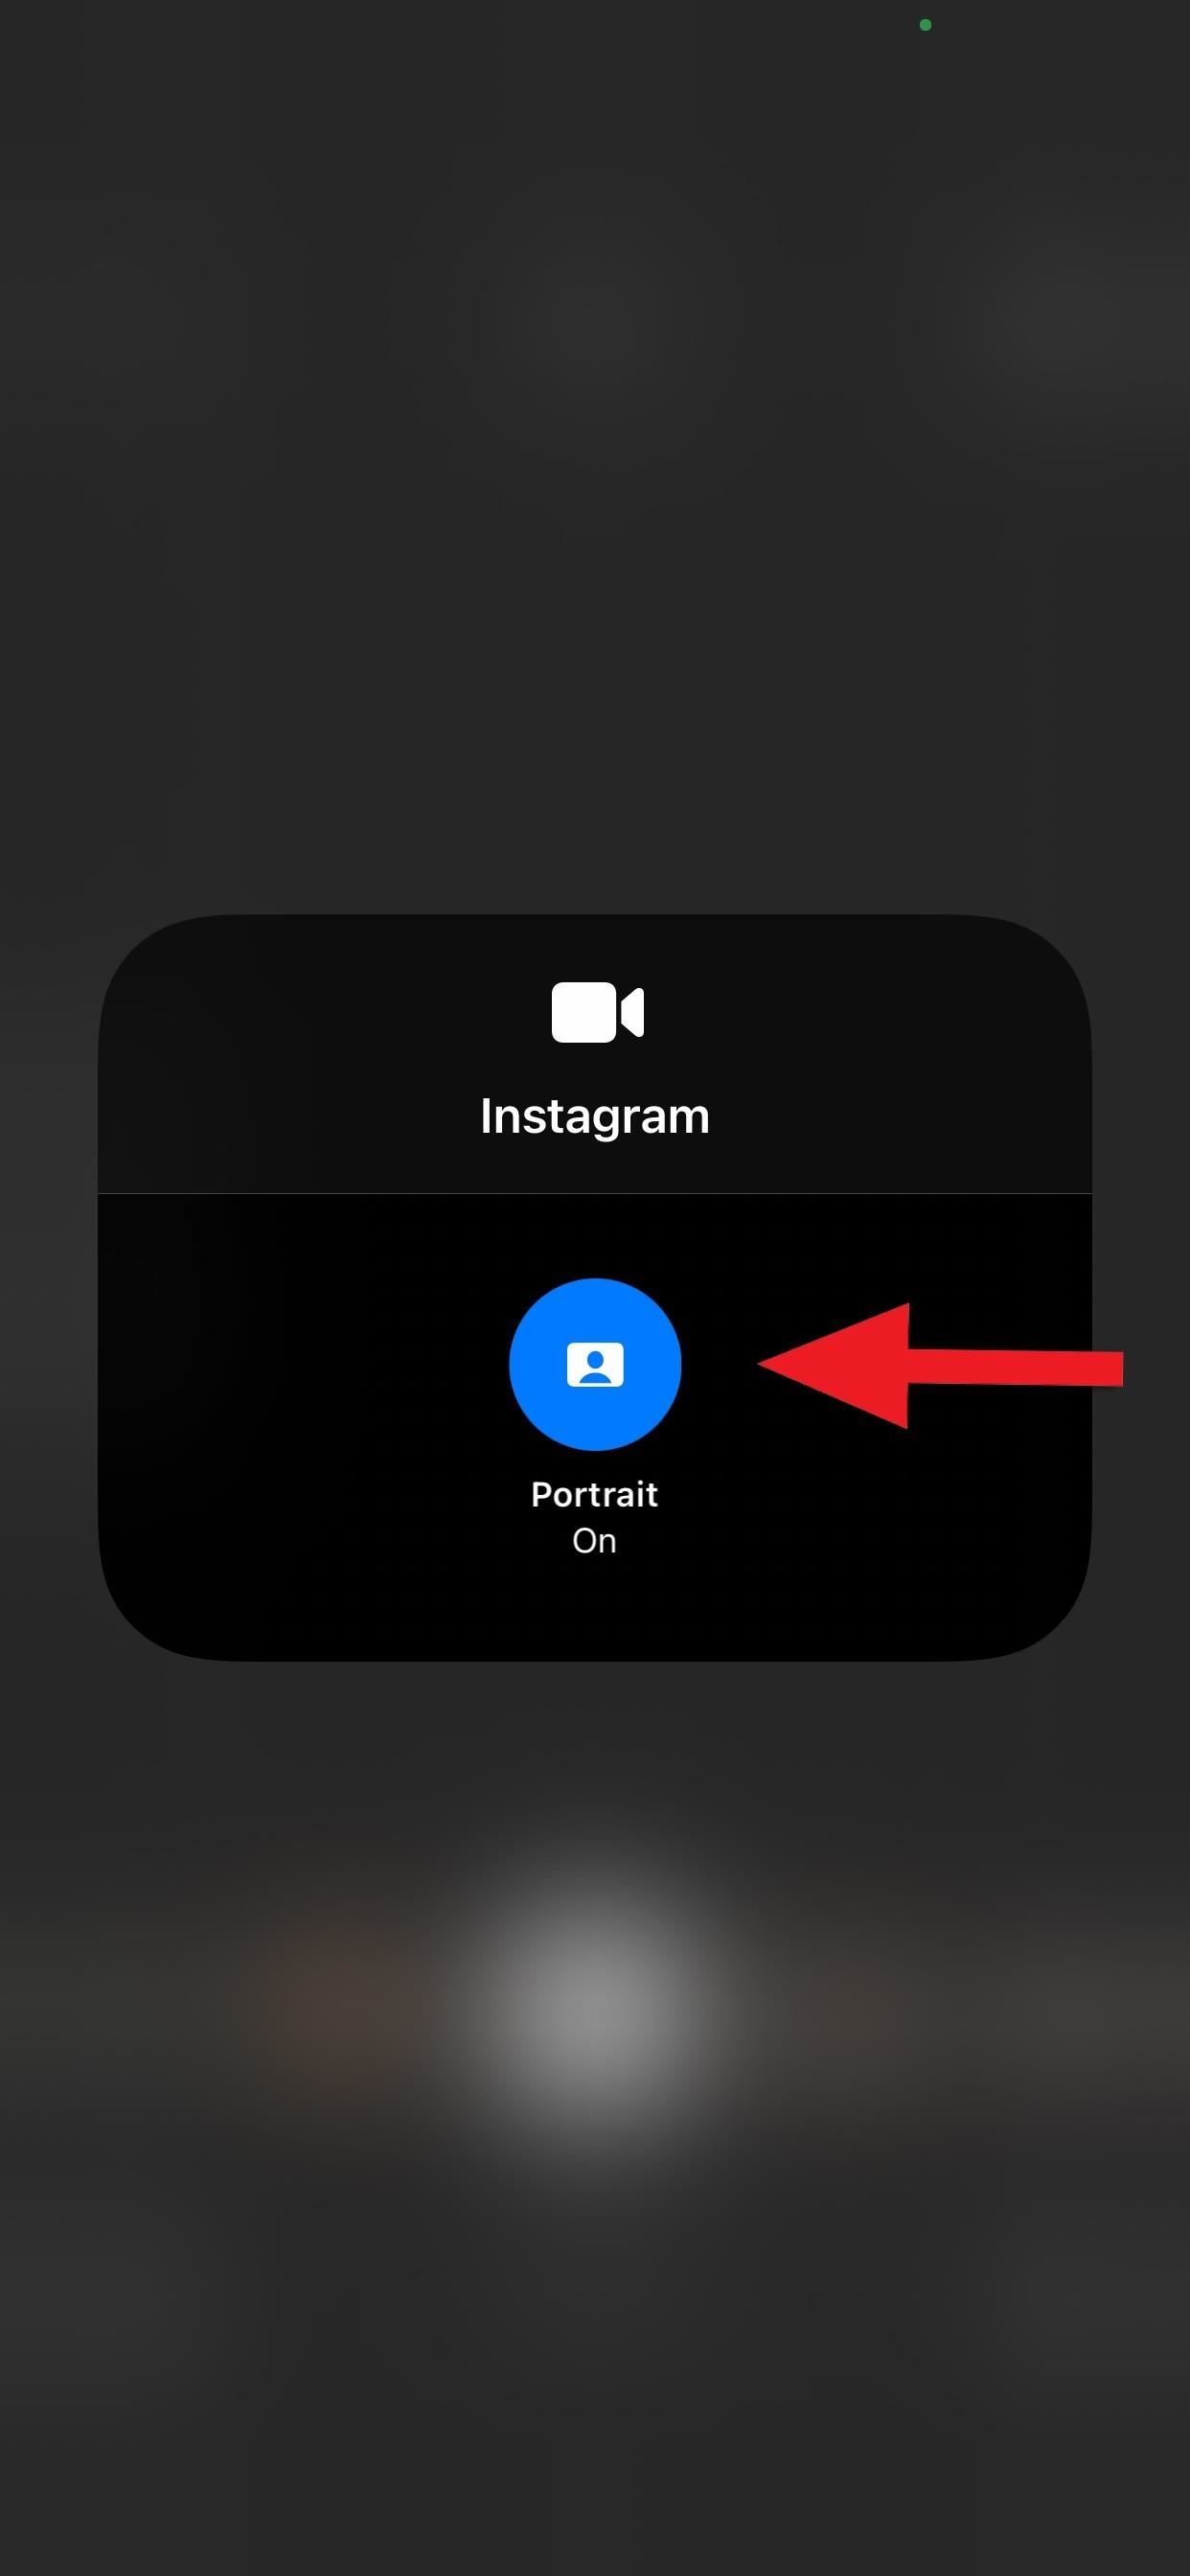 The Trick to Using Your iPhone's Portrait Mode in Other Photo and Video Apps